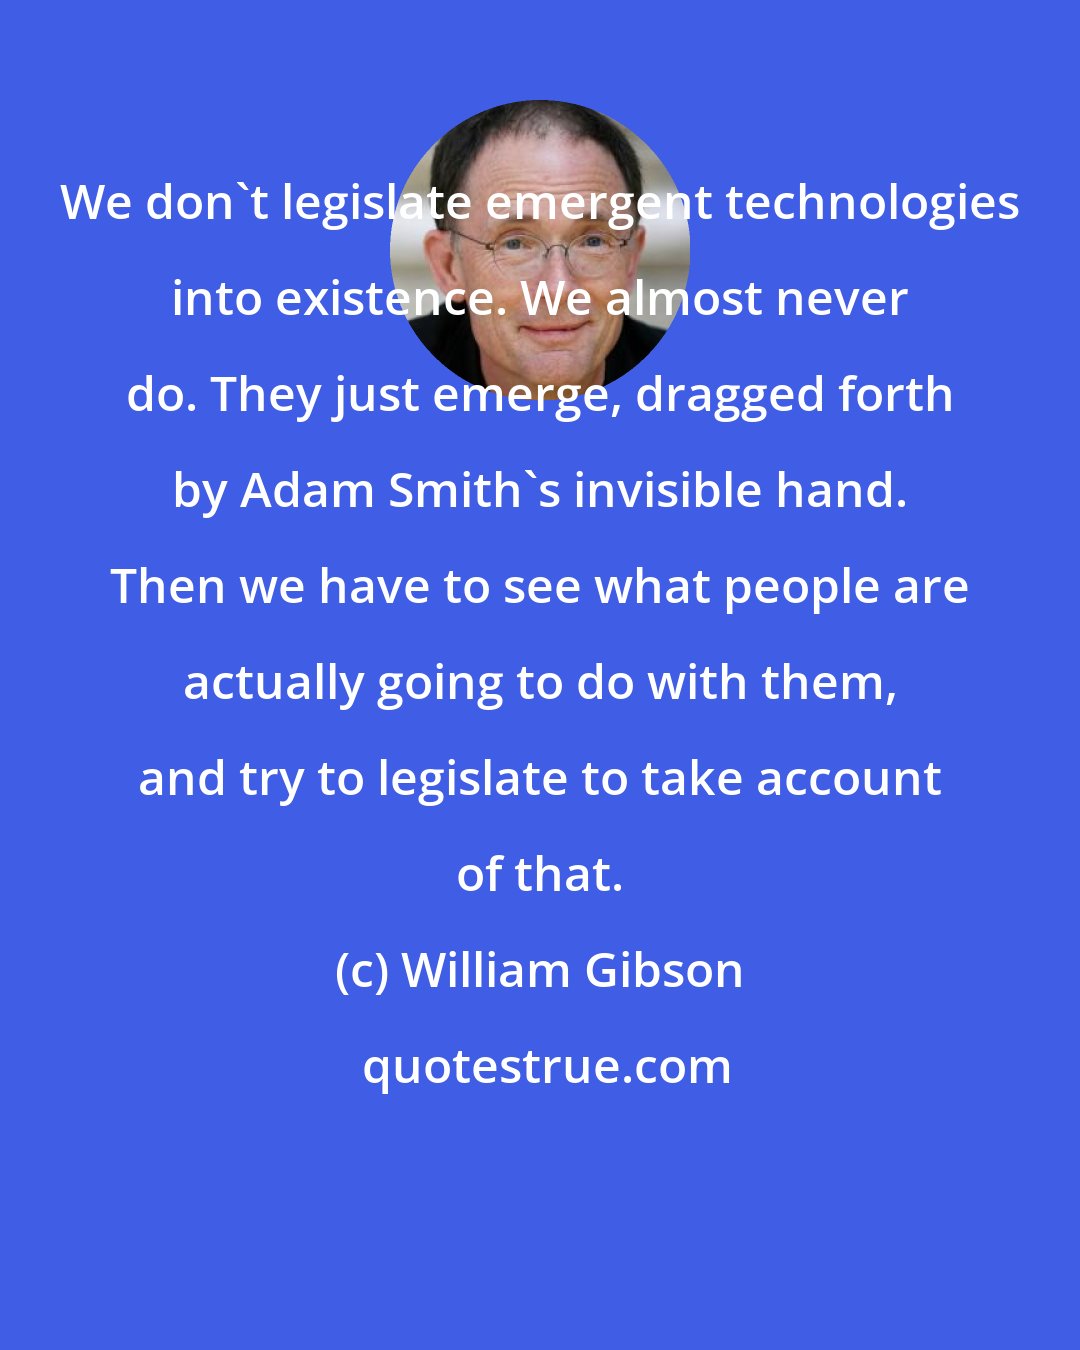 William Gibson: We don't legislate emergent technologies into existence. We almost never do. They just emerge, dragged forth by Adam Smith's invisible hand. Then we have to see what people are actually going to do with them, and try to legislate to take account of that.